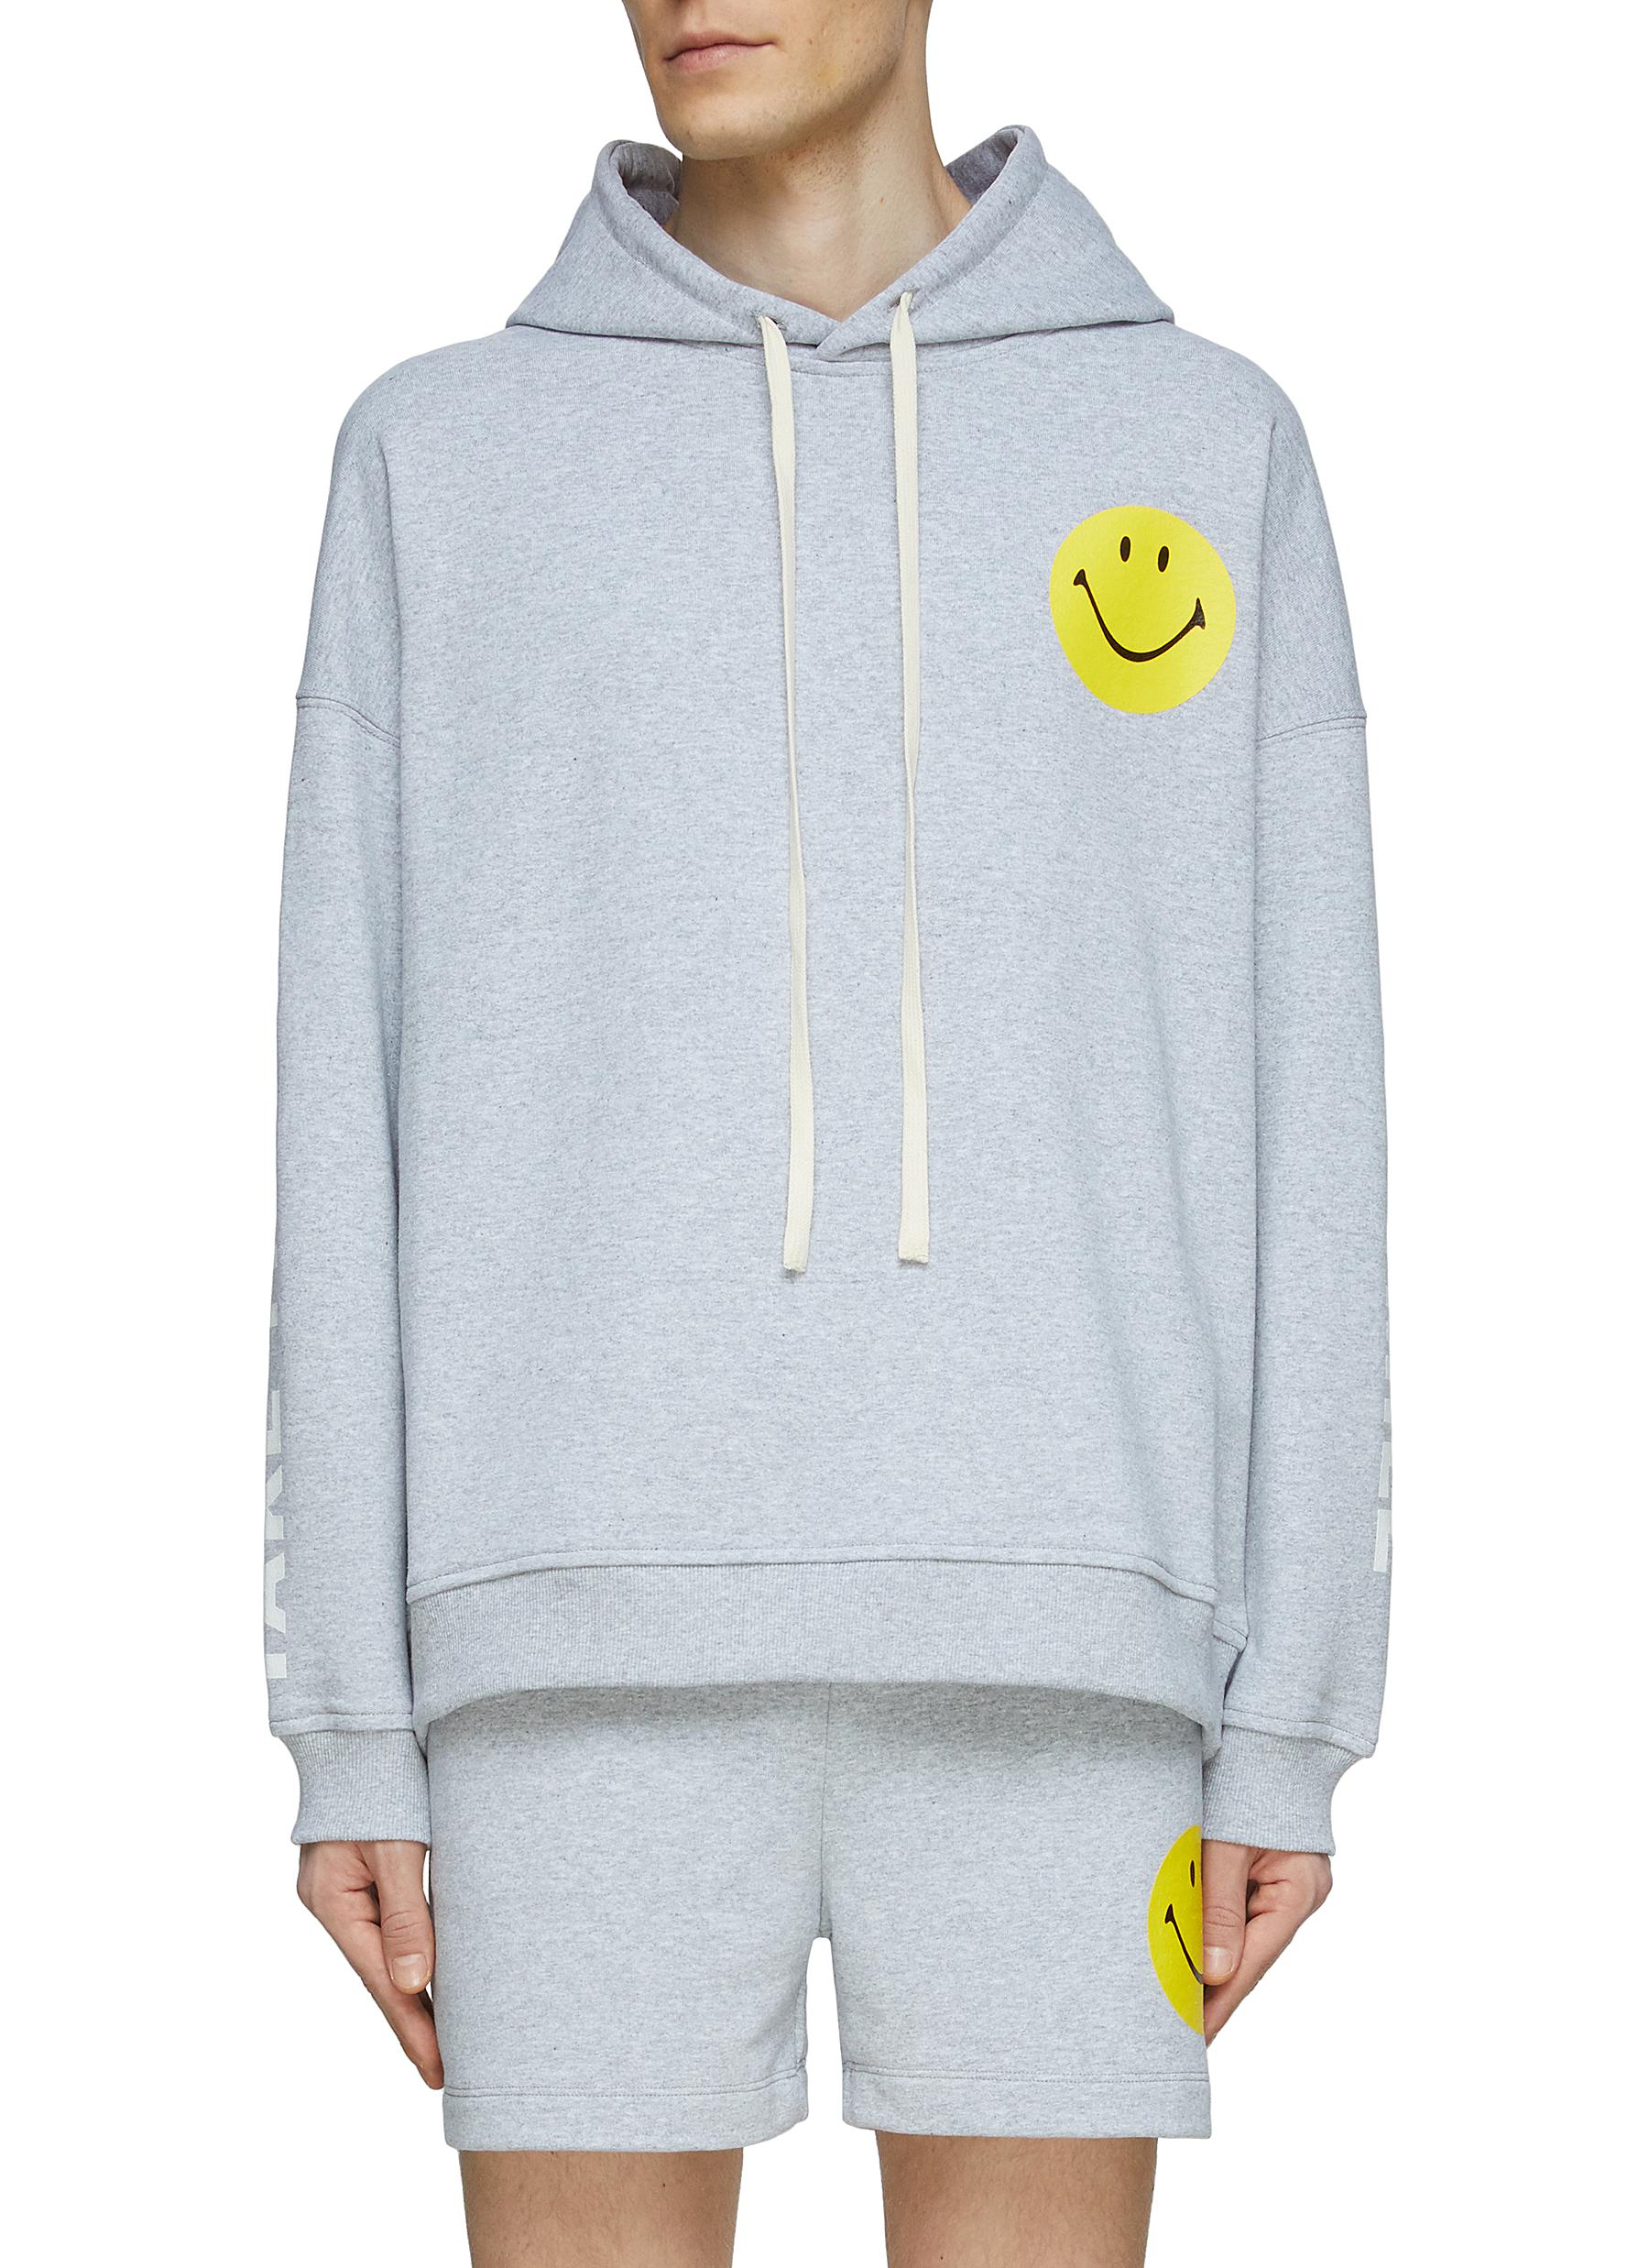 JOSHUA'S SMILEY FACE WITH SLOGAN PULLOVER HOODIE